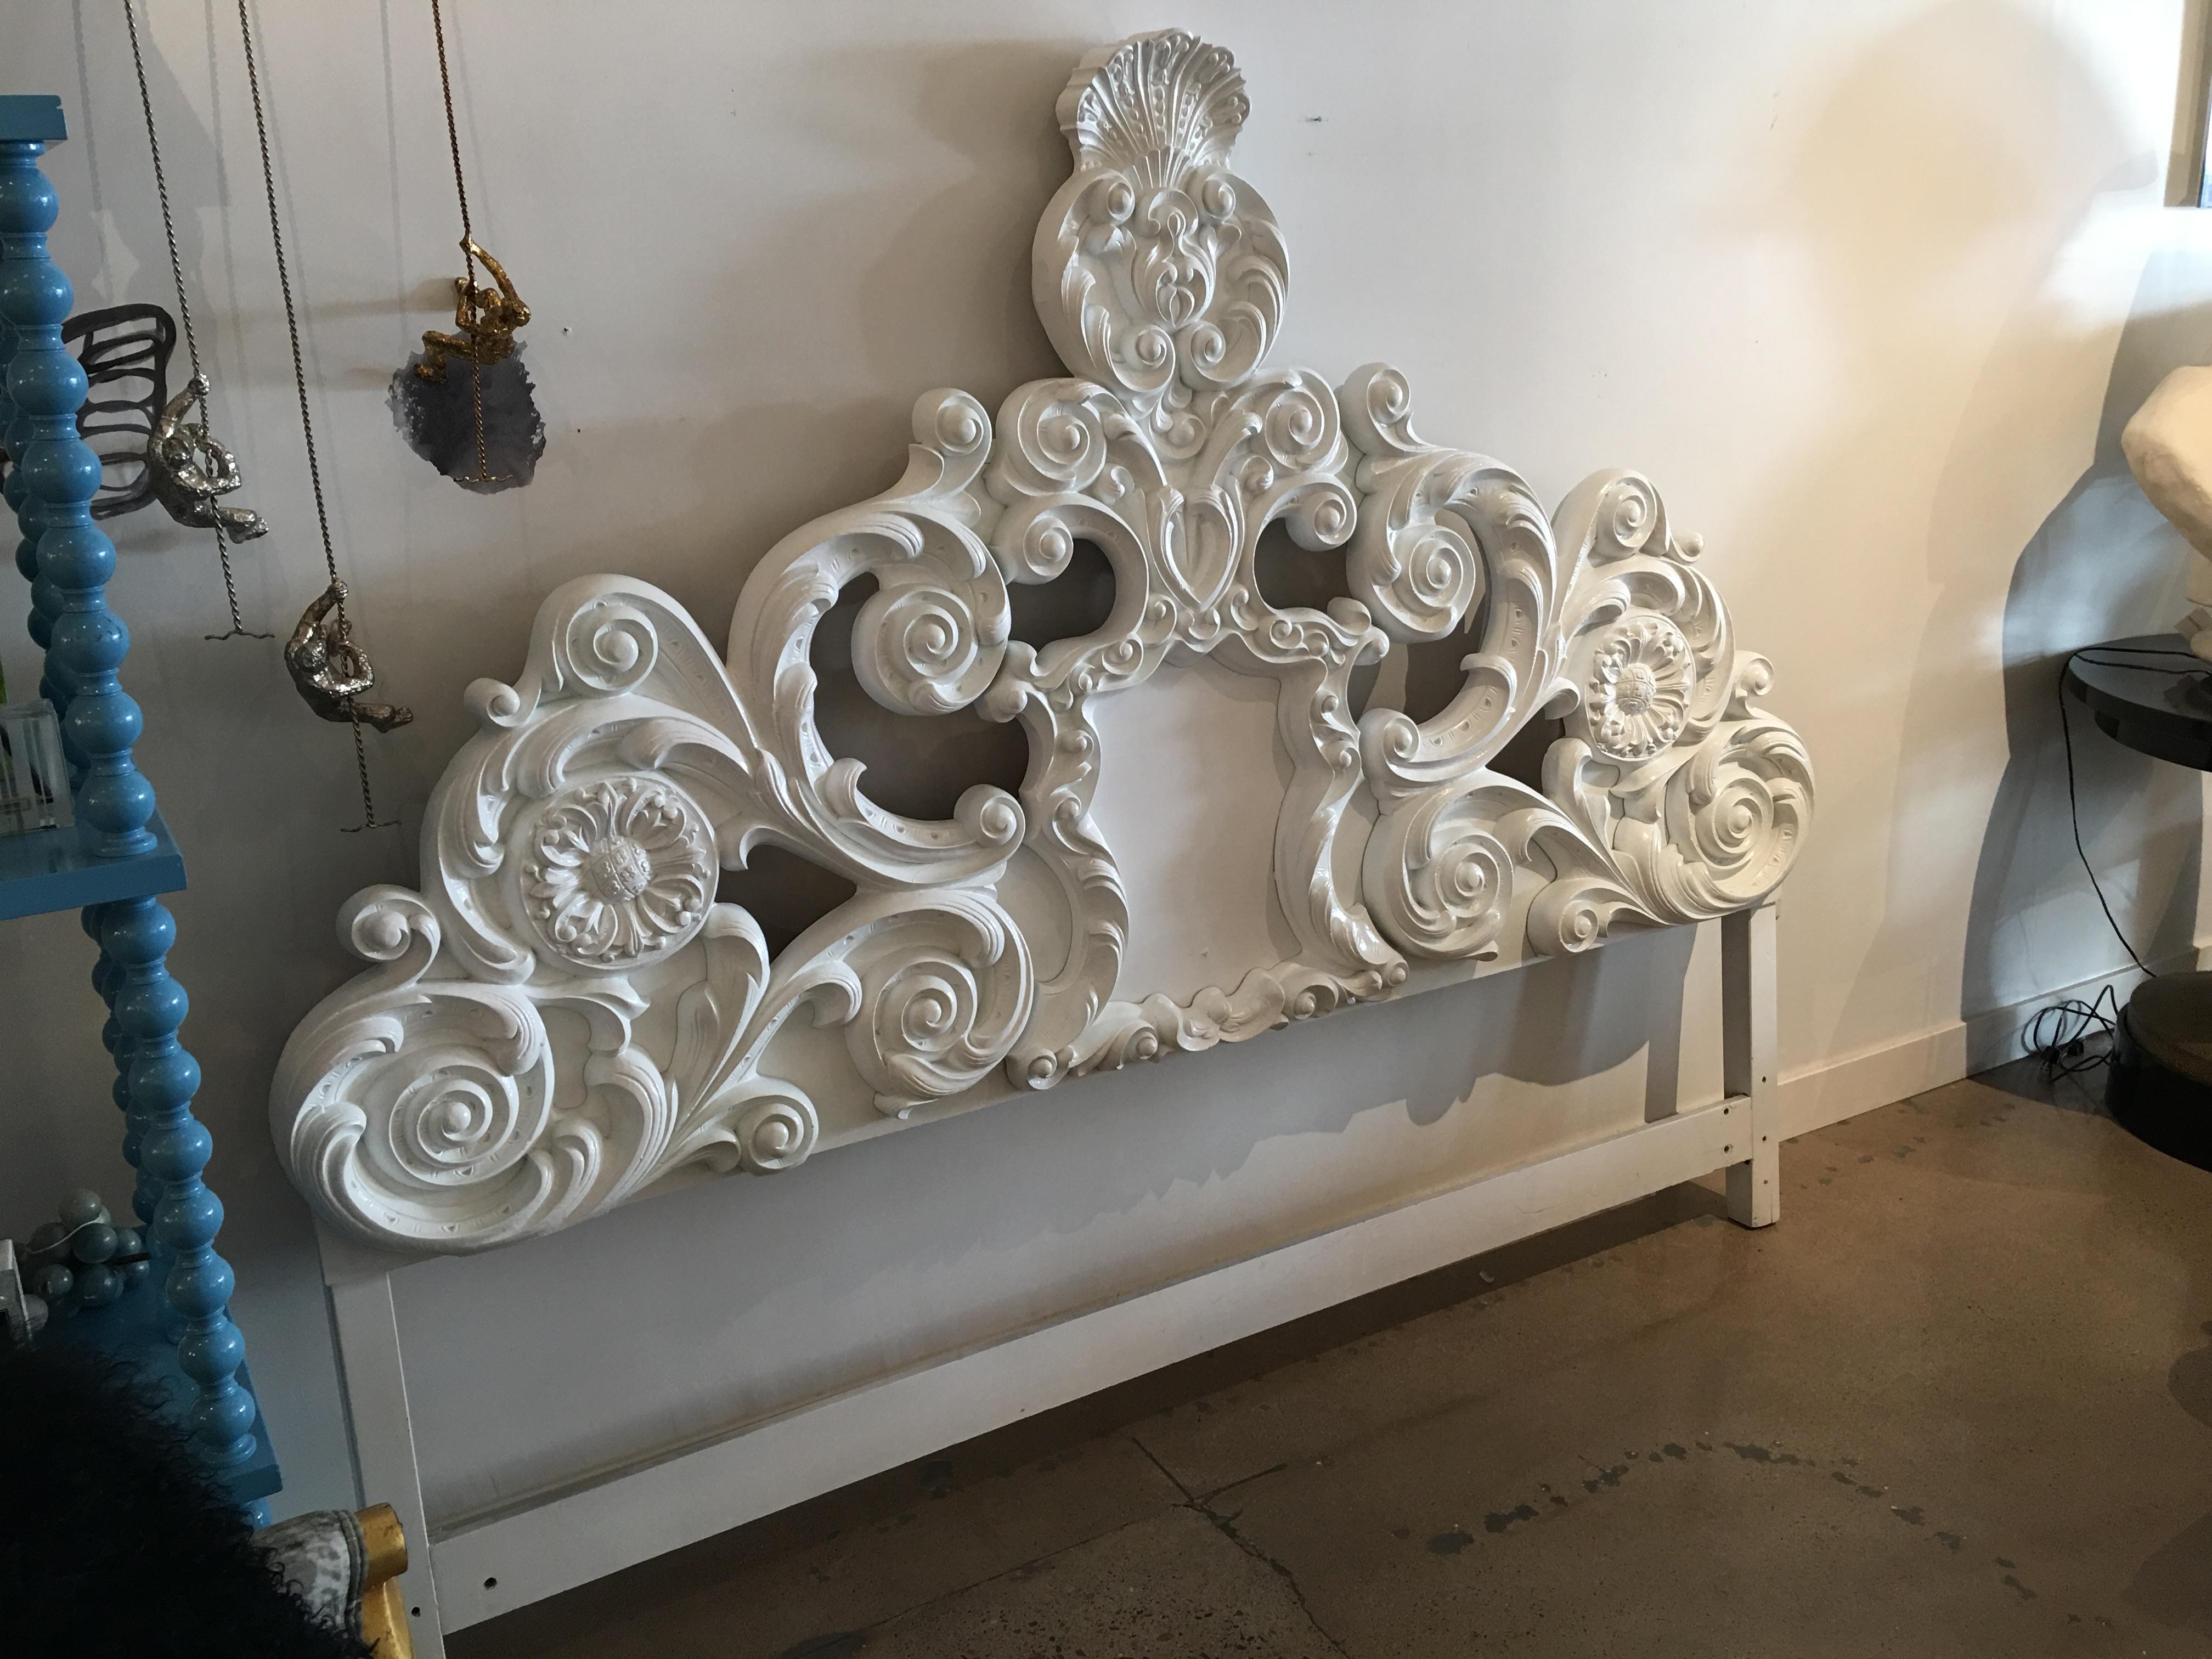 This highly ornate and decorated midcentury headboard has been newly lacquered in a bright white. Ready to be attached to a harvard frame for your bedroom!